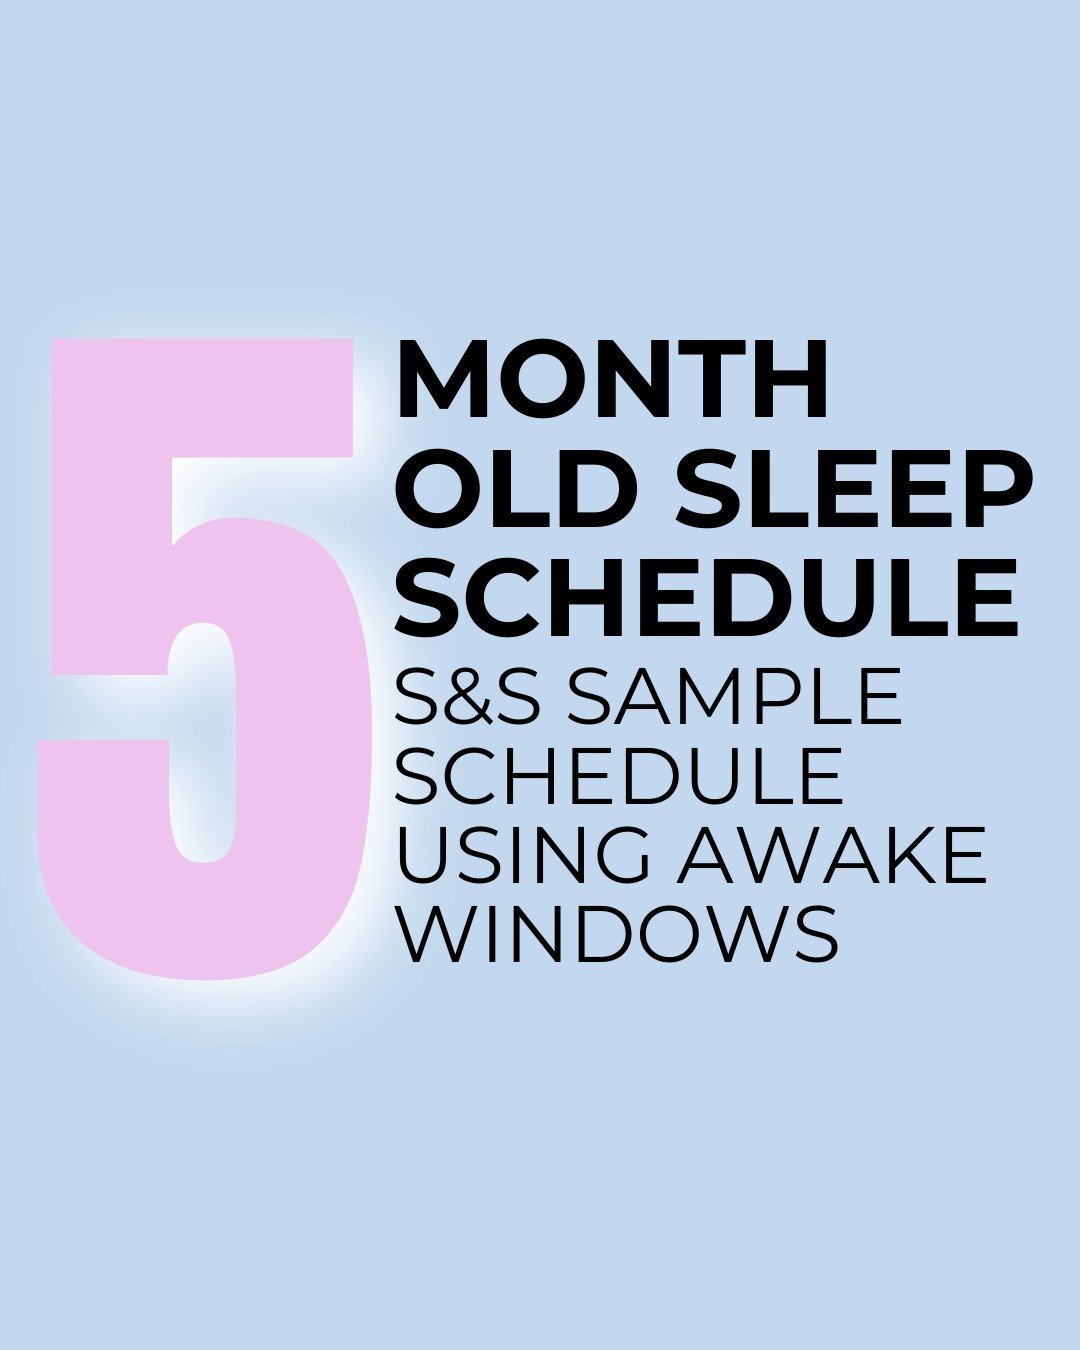 Do you have a little one already 5 months of age or almost there? 👶
 
Here&rsquo;s your sample sleep schedule 🤩
 
It&rsquo;s not a set time sleep schedule. Our sample schedules are based on age appropriate awake windows which you can tailor to your